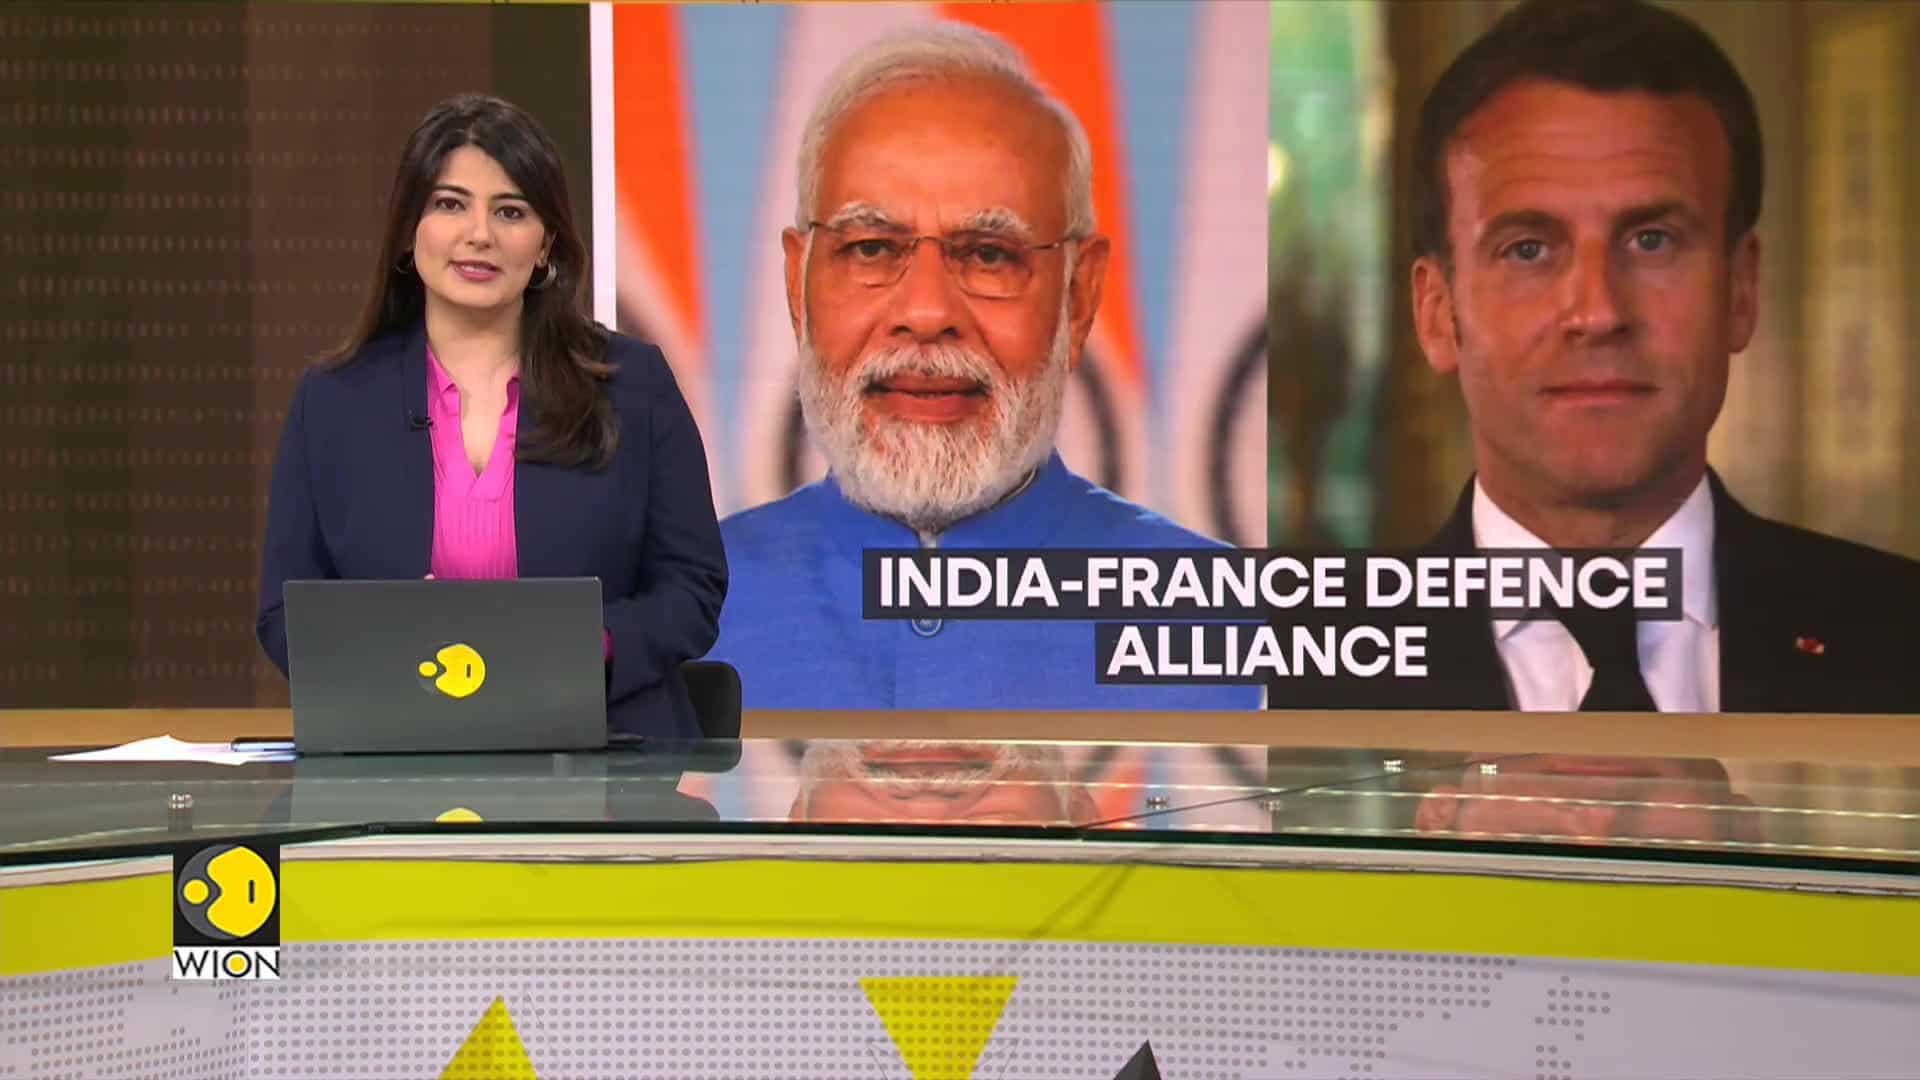 India-France agree on partnership opportunities